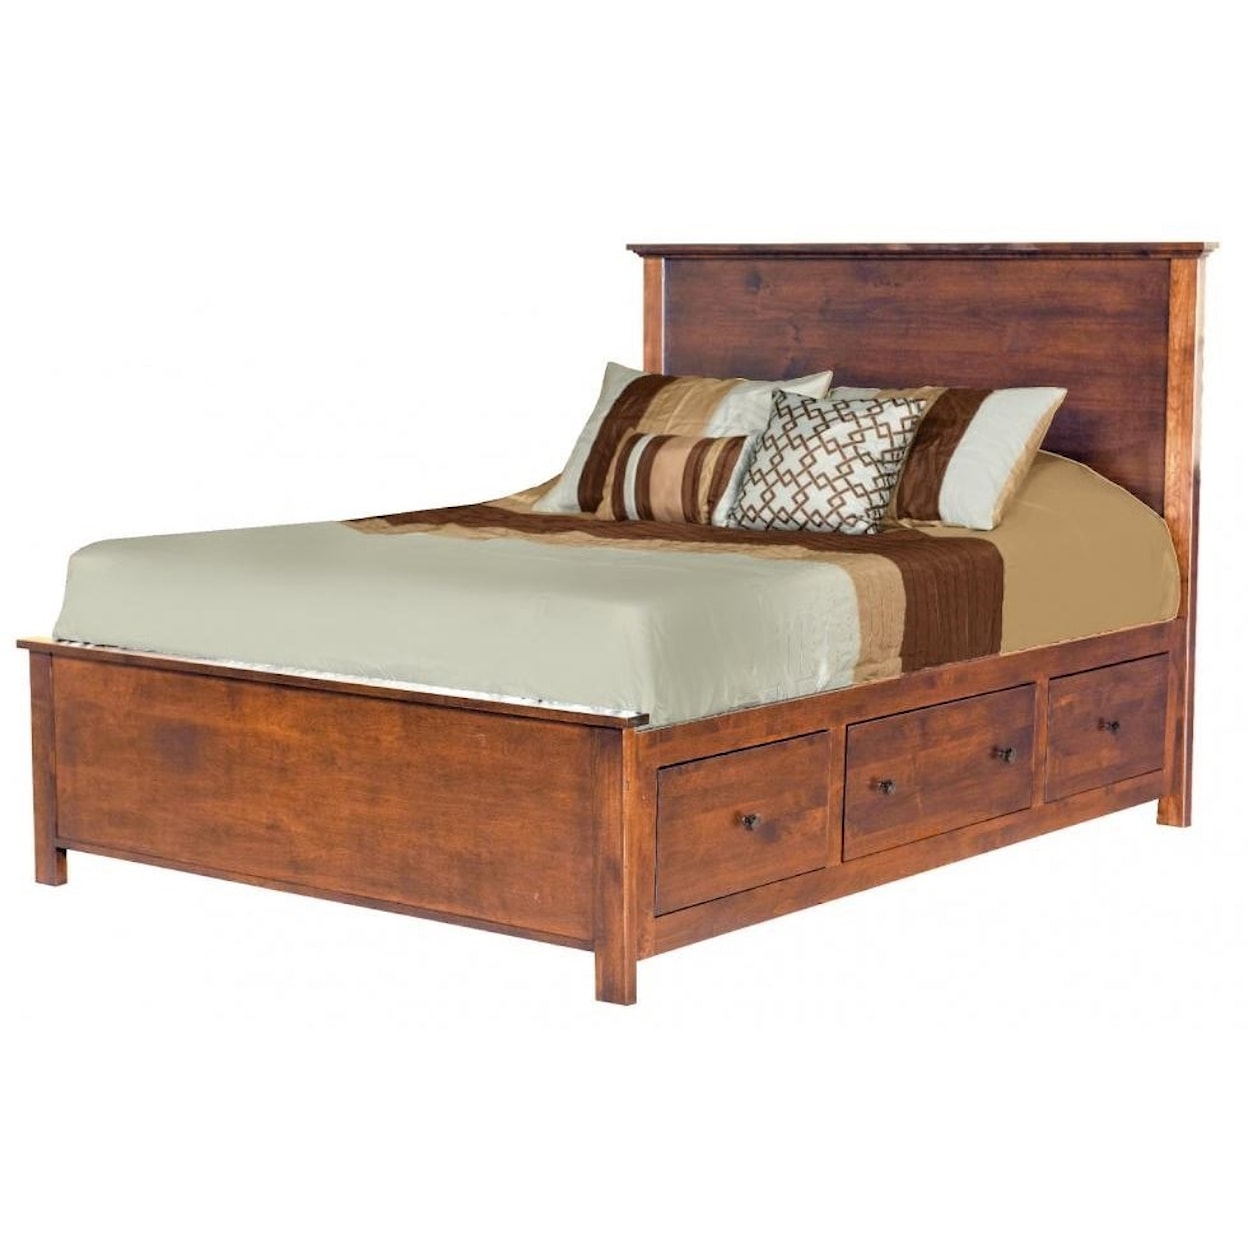 Archbold Furniture Misc. Beds Queen Elevated Storage Bed